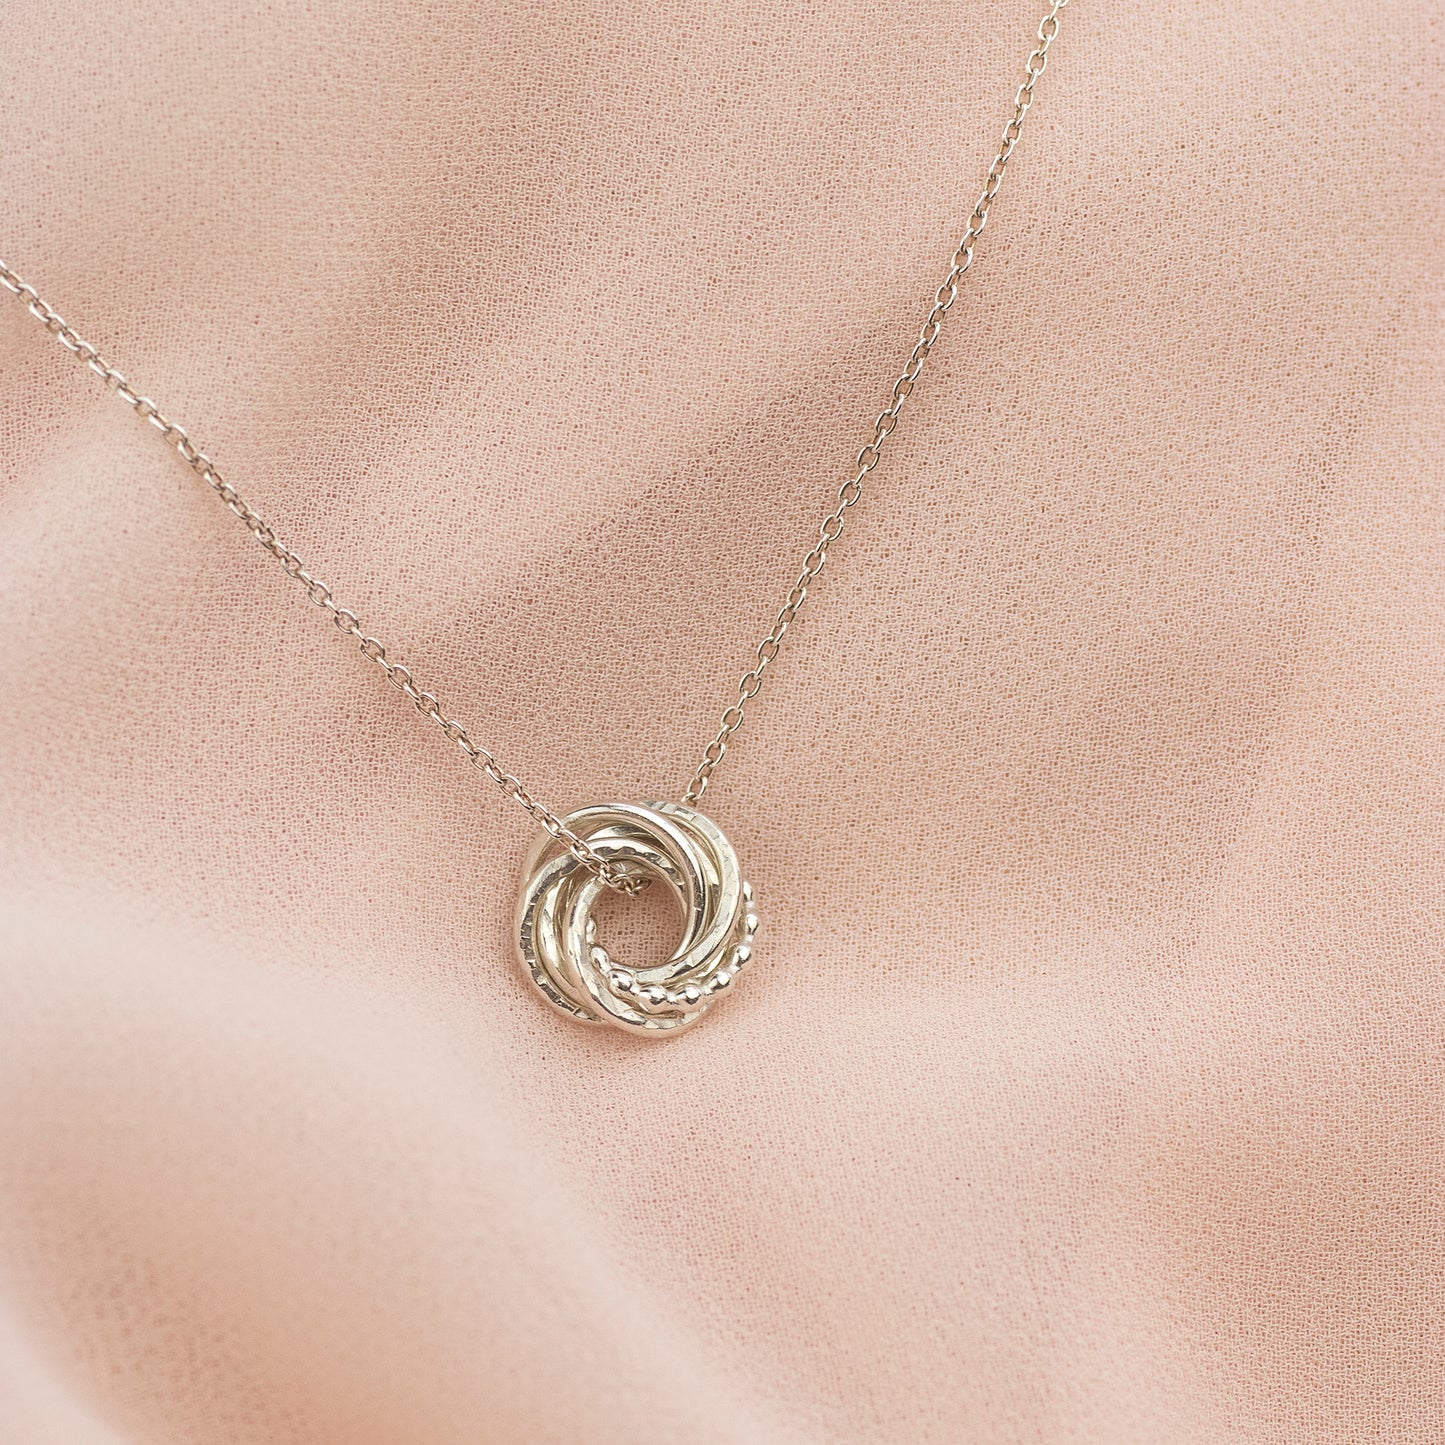 6th Anniversary Necklace - The Original 6 Rings for 6 Years Necklace - Silver Love Knot